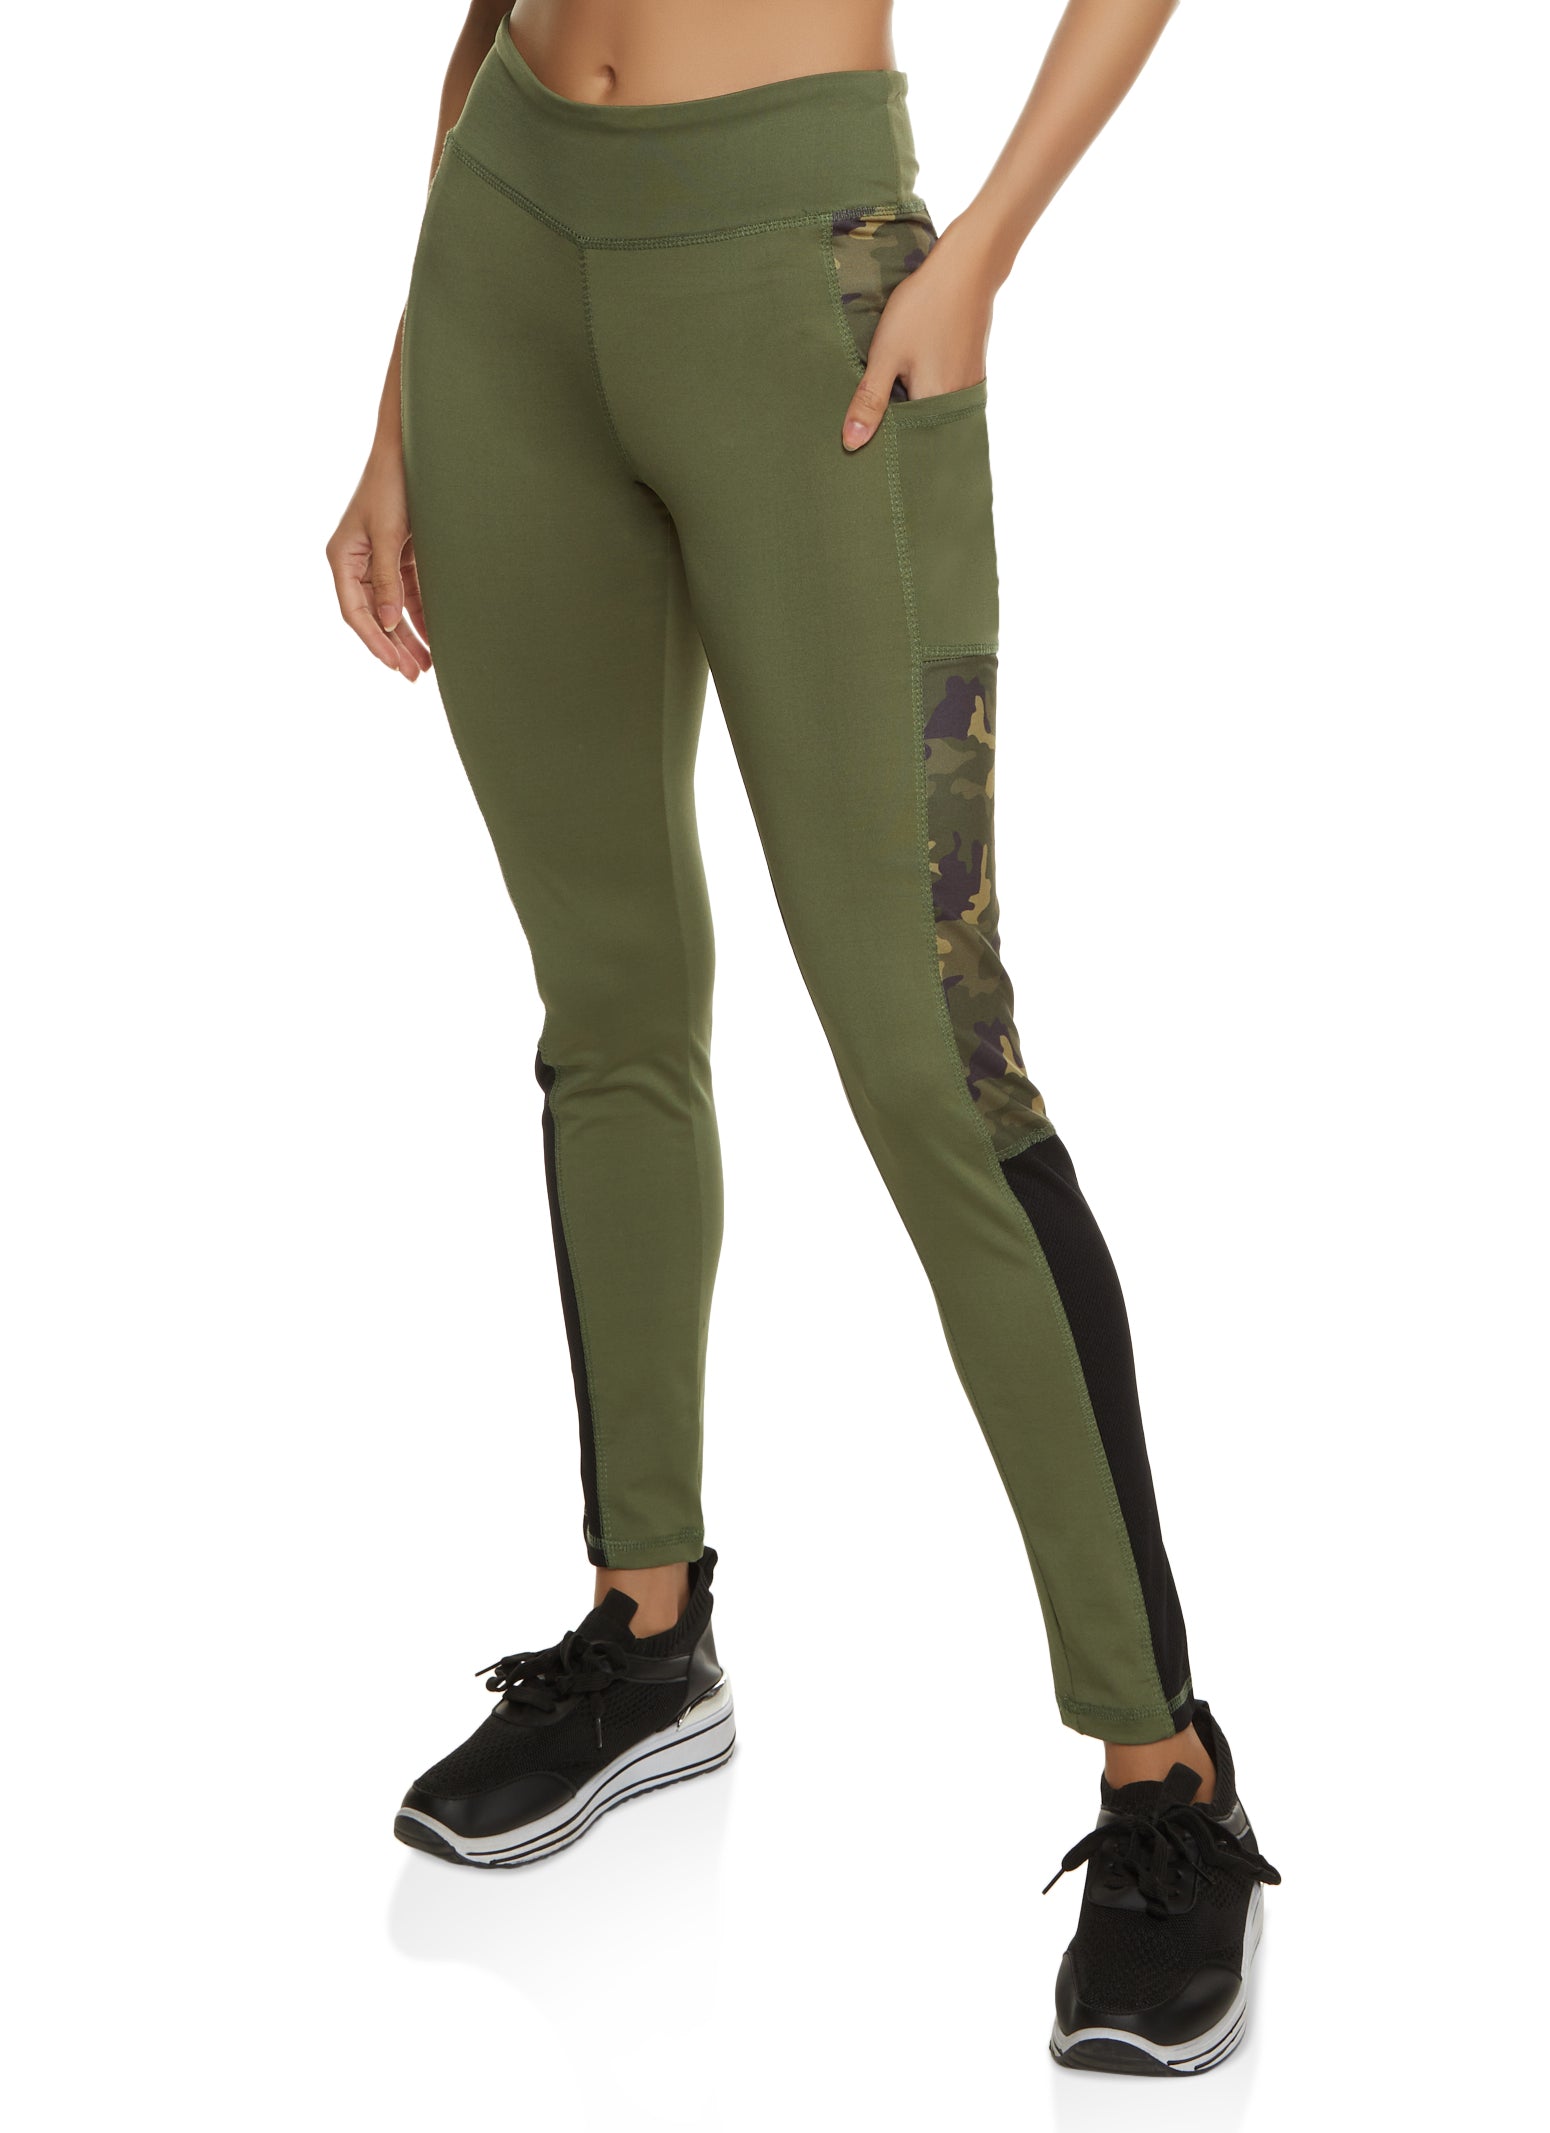 Camo Color Block Cell Phone Pocket Leggings - Olive